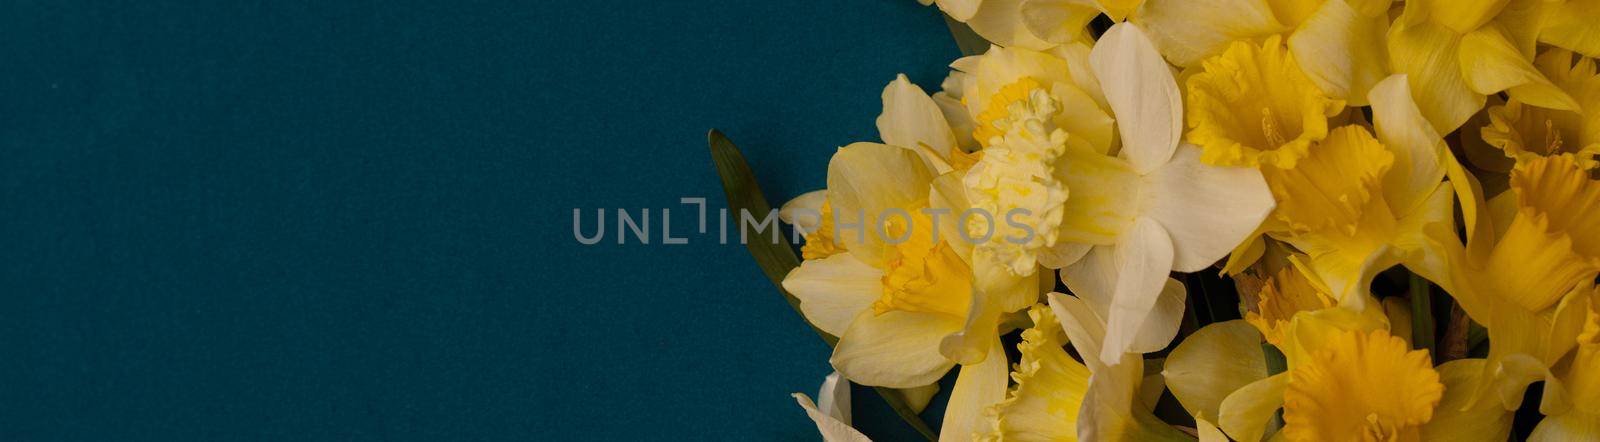 Romantic banner, delicate yellow daffodils flowers close-up. Full size. blossom